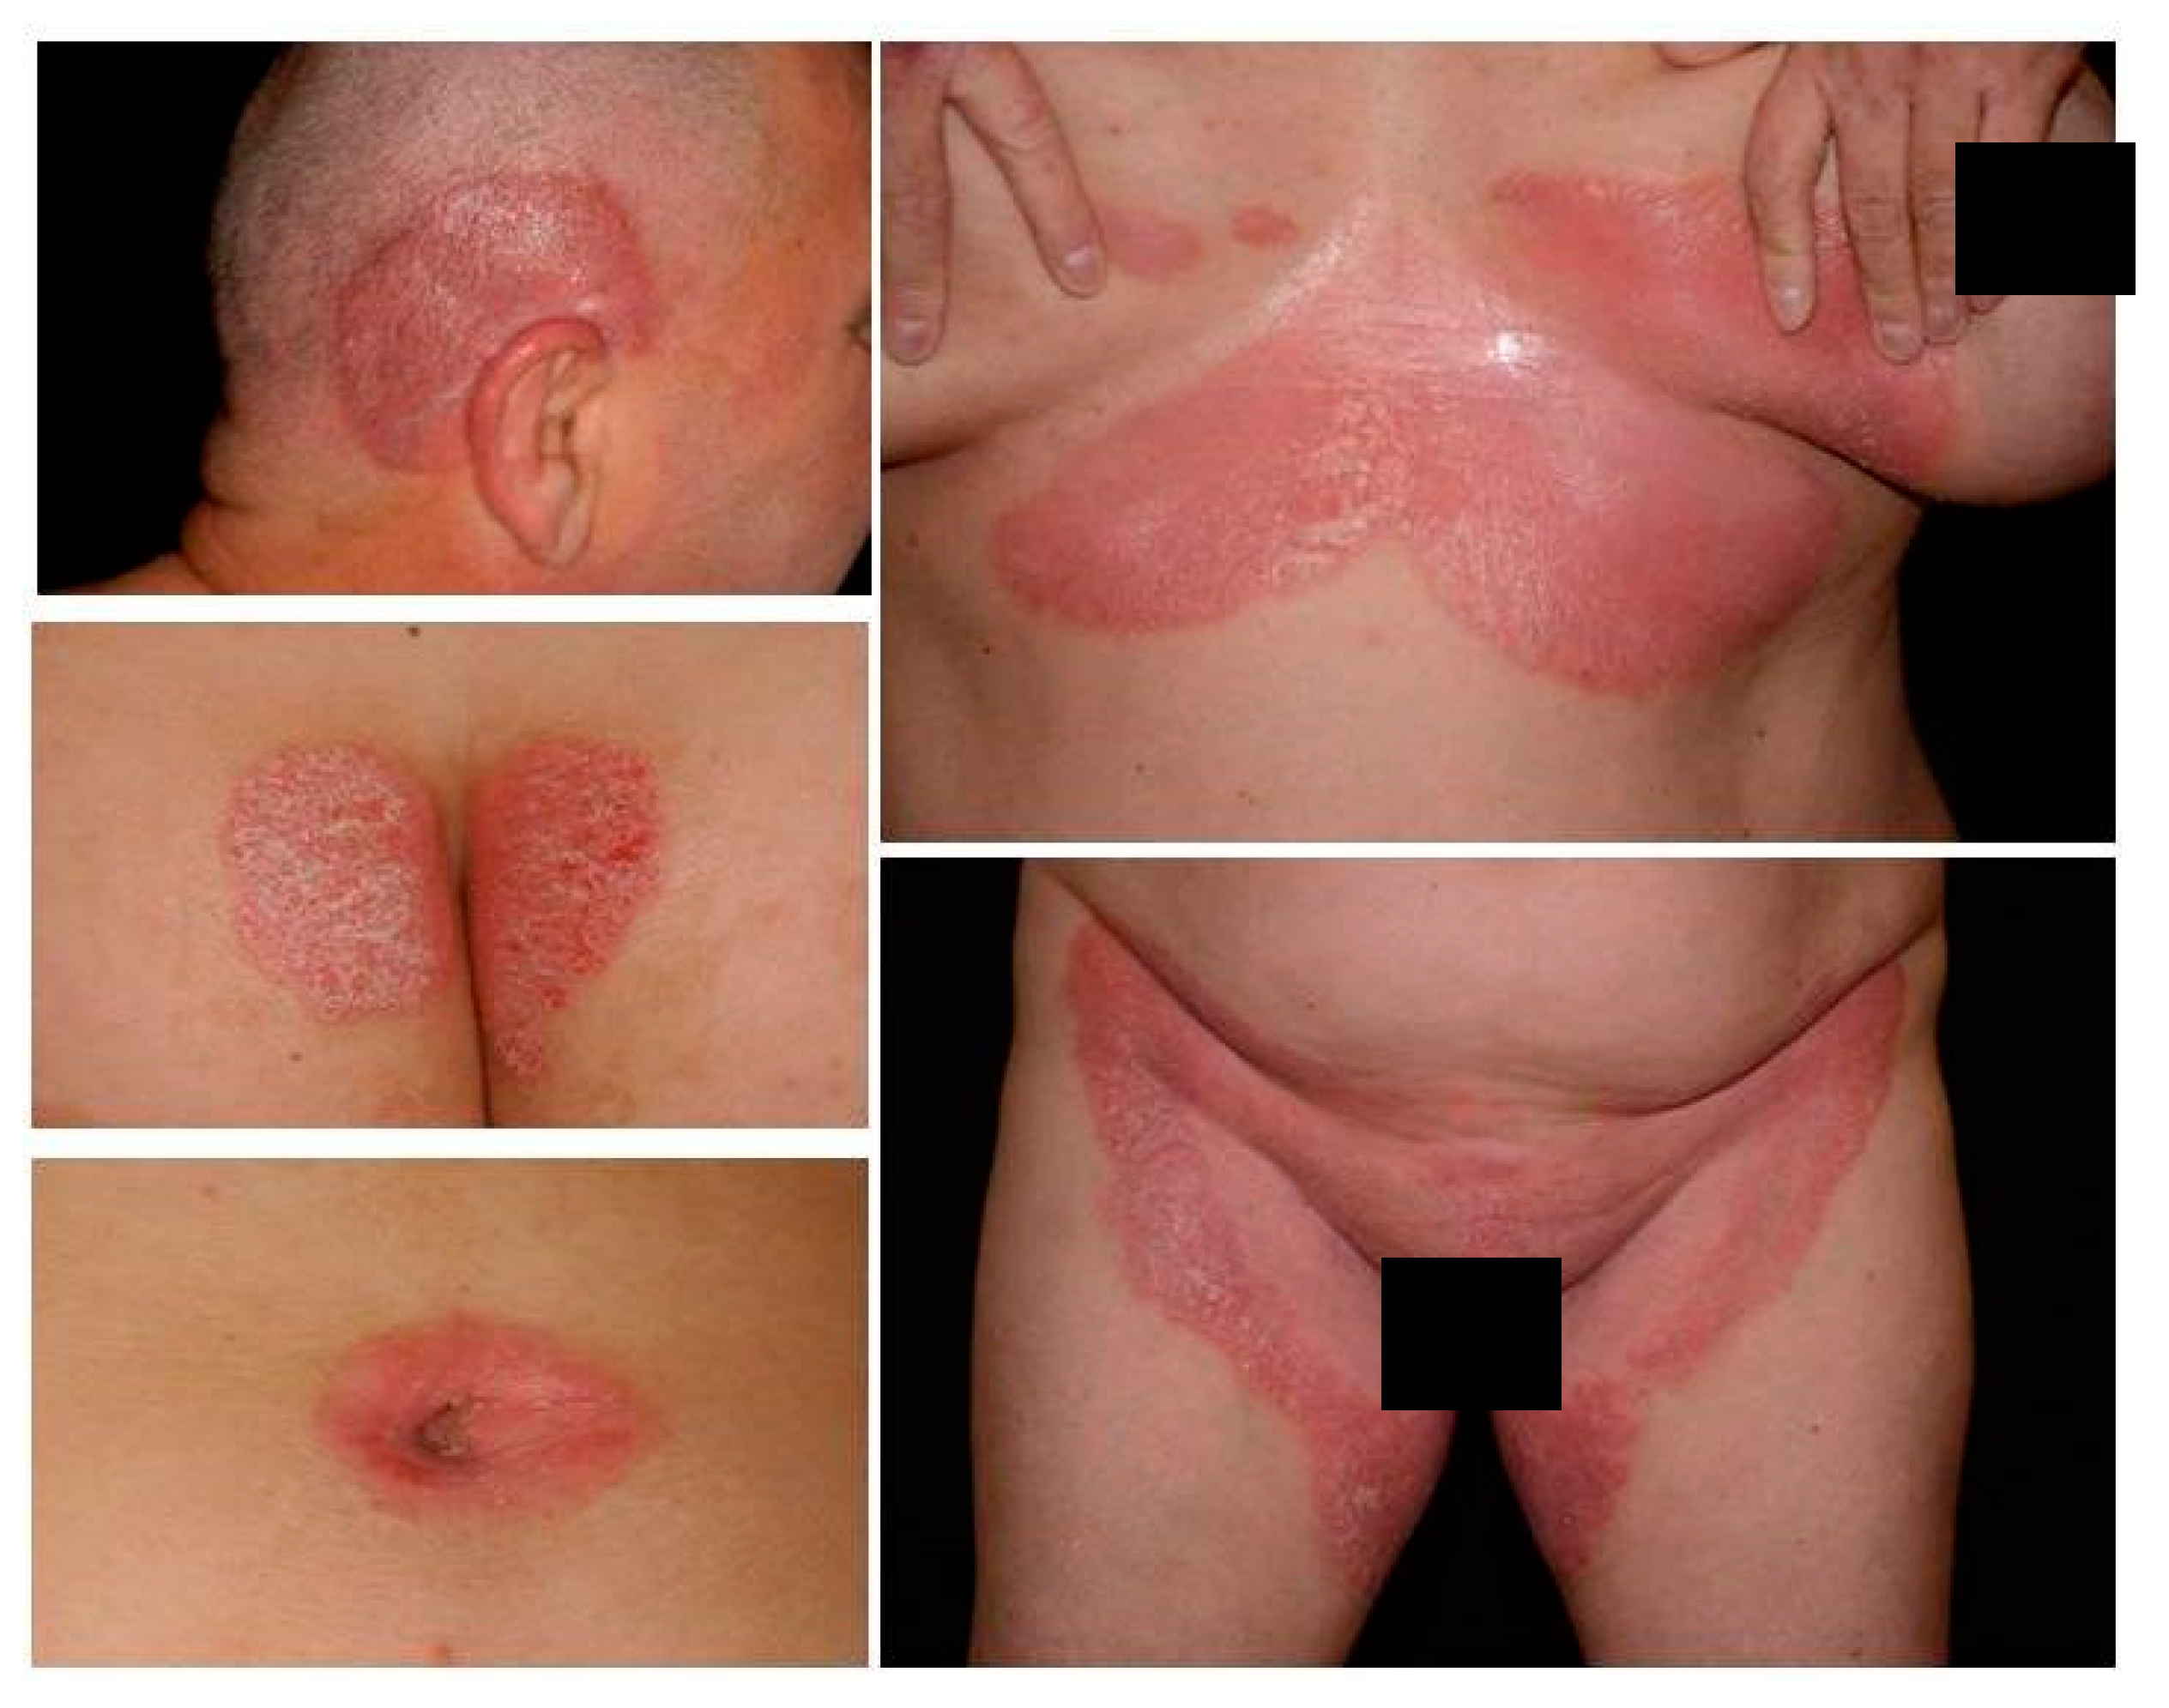 Inverse psoriasis treatment - Account Options